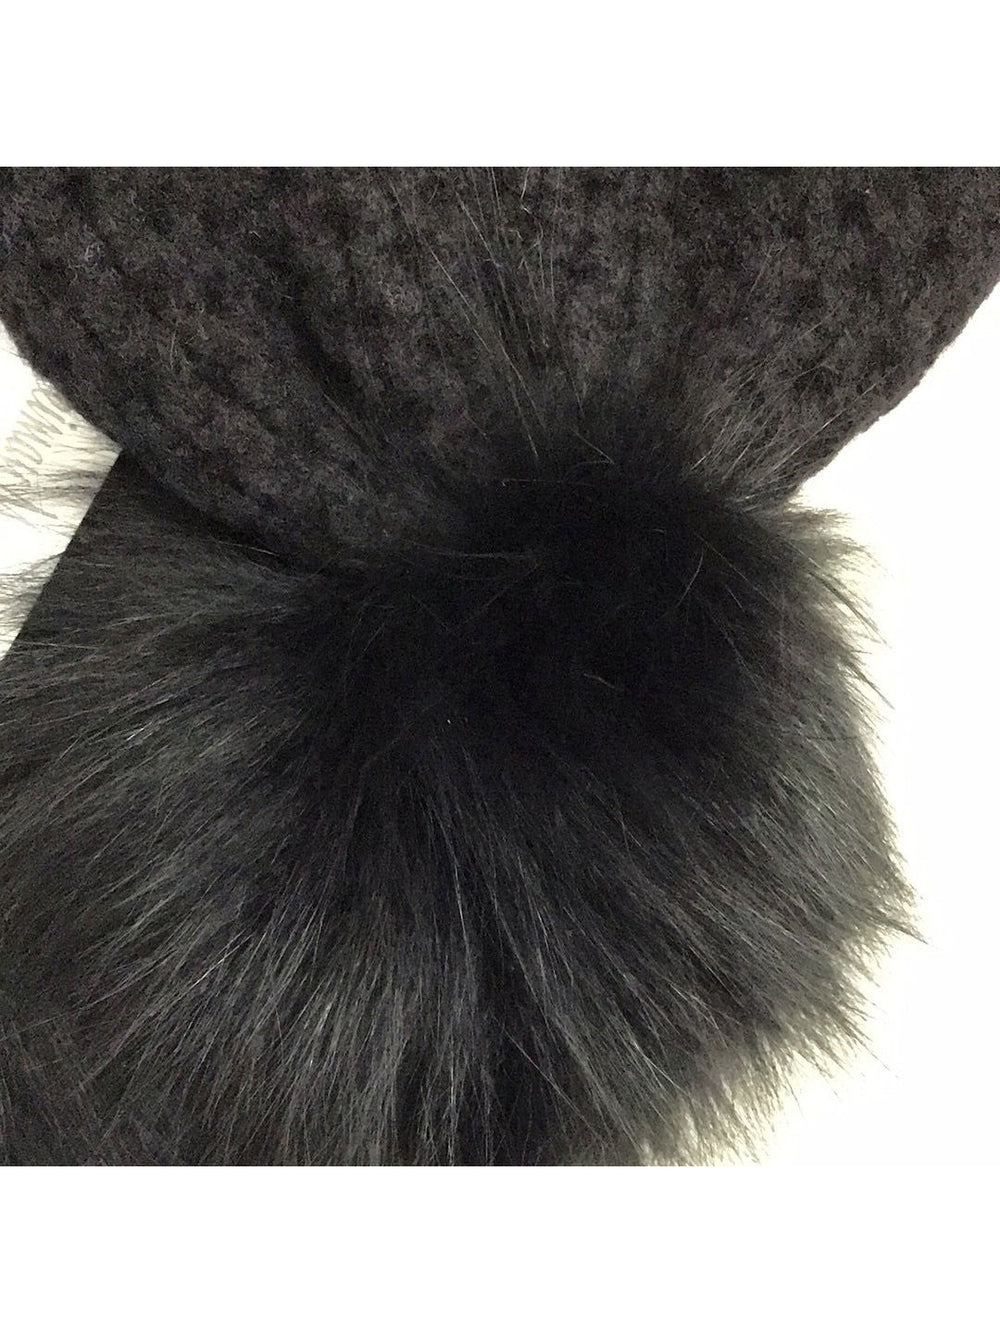 Neiman Marcus Black Scarf w/Fur Pom Poms - NWT - The Kennedy Collective Thrift - 